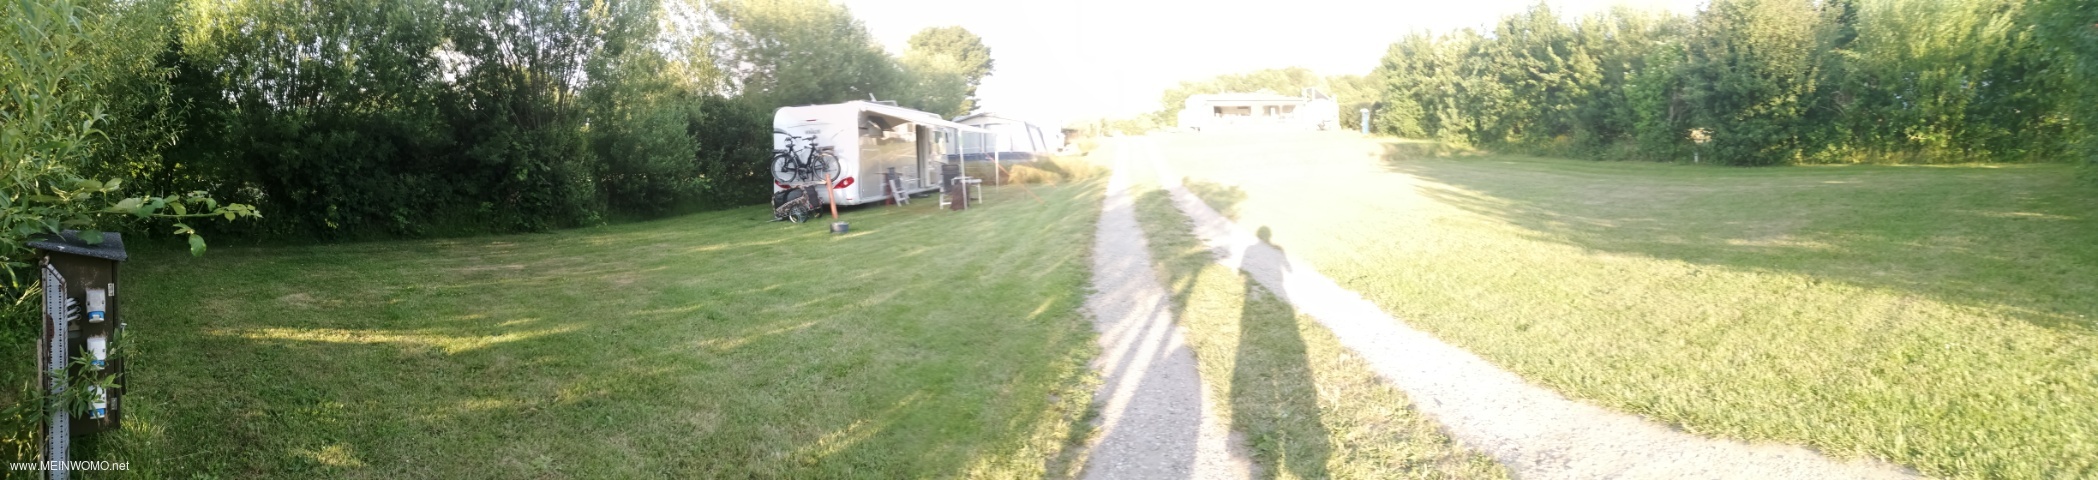 Shows the large parking spaces for car campers on the campsite approx. 200 m